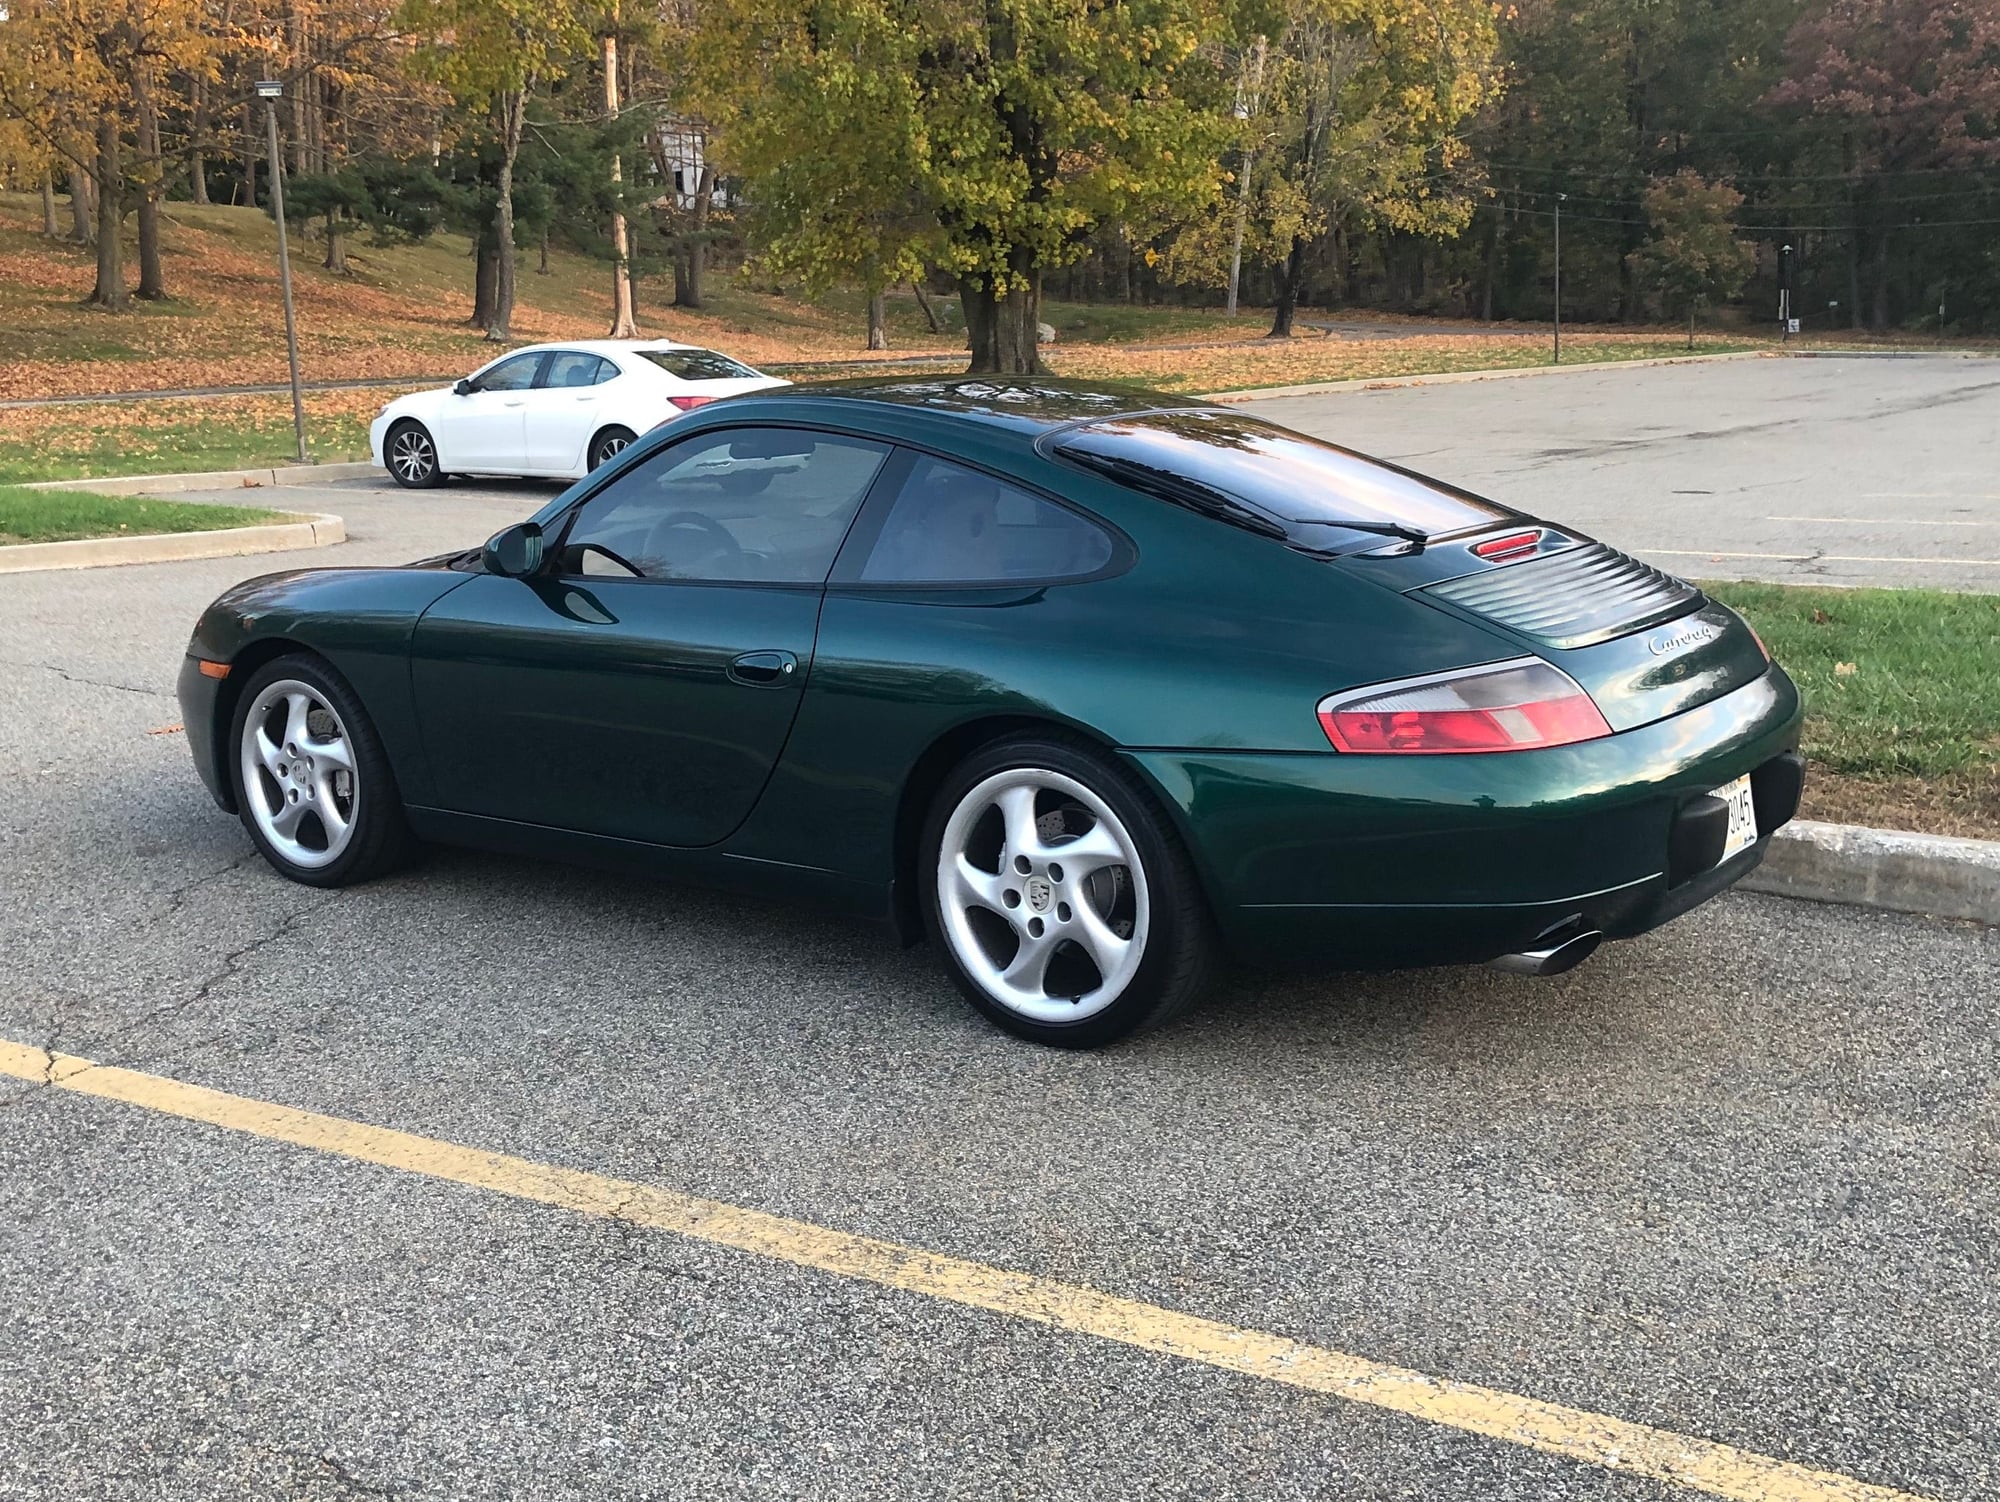 2001 Porsche 911 - 2001 Porsche 911 Carrera 4 -- Rainforest Green -- *IMS/RMS/CLUTCH/AOS* Recently Done - Used - VIN WP0AA29991S620883 - 186,000 Miles - 6 cyl - AWD - Manual - Coupe - Other - Queens, NY 11385, United States